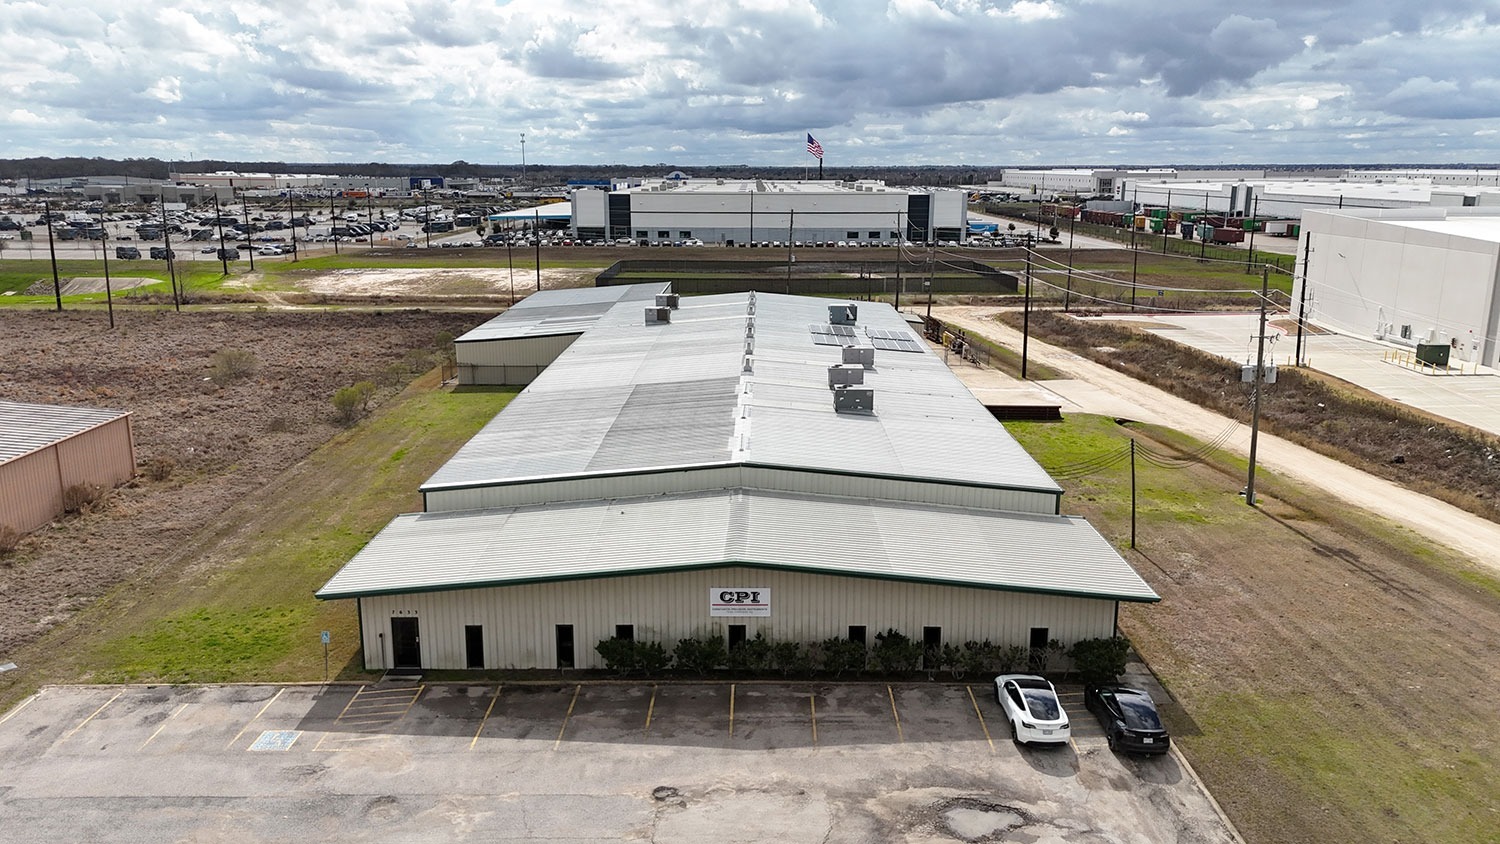 Partners Real Estate arranges sale of 32,900-sq.-ft. industrial property on 2.66 acres of land in Katy, Texas